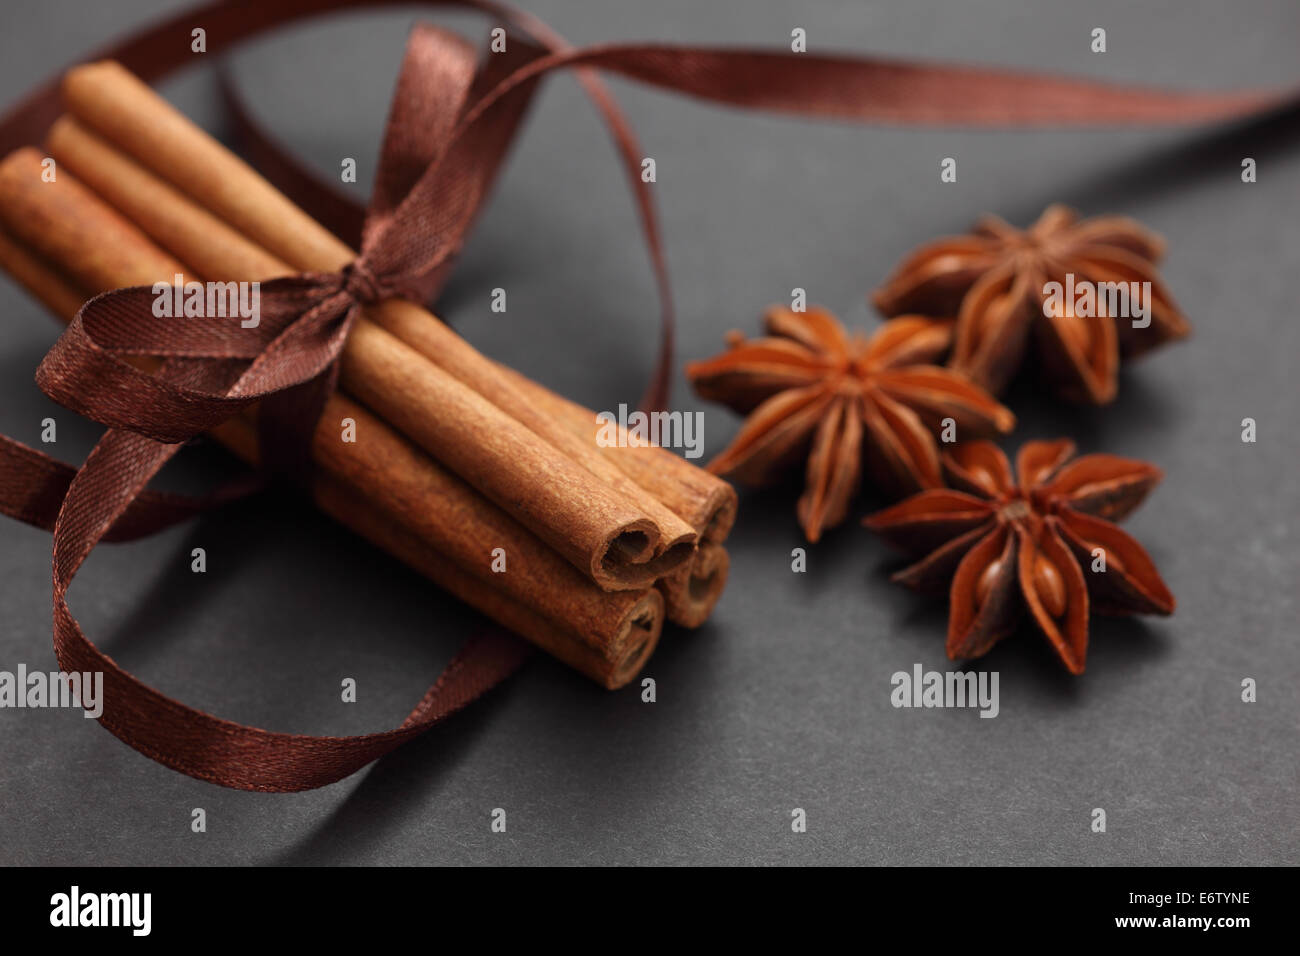 Cinnamon sticks and star anise. Black background. Close-up. Stock Photo